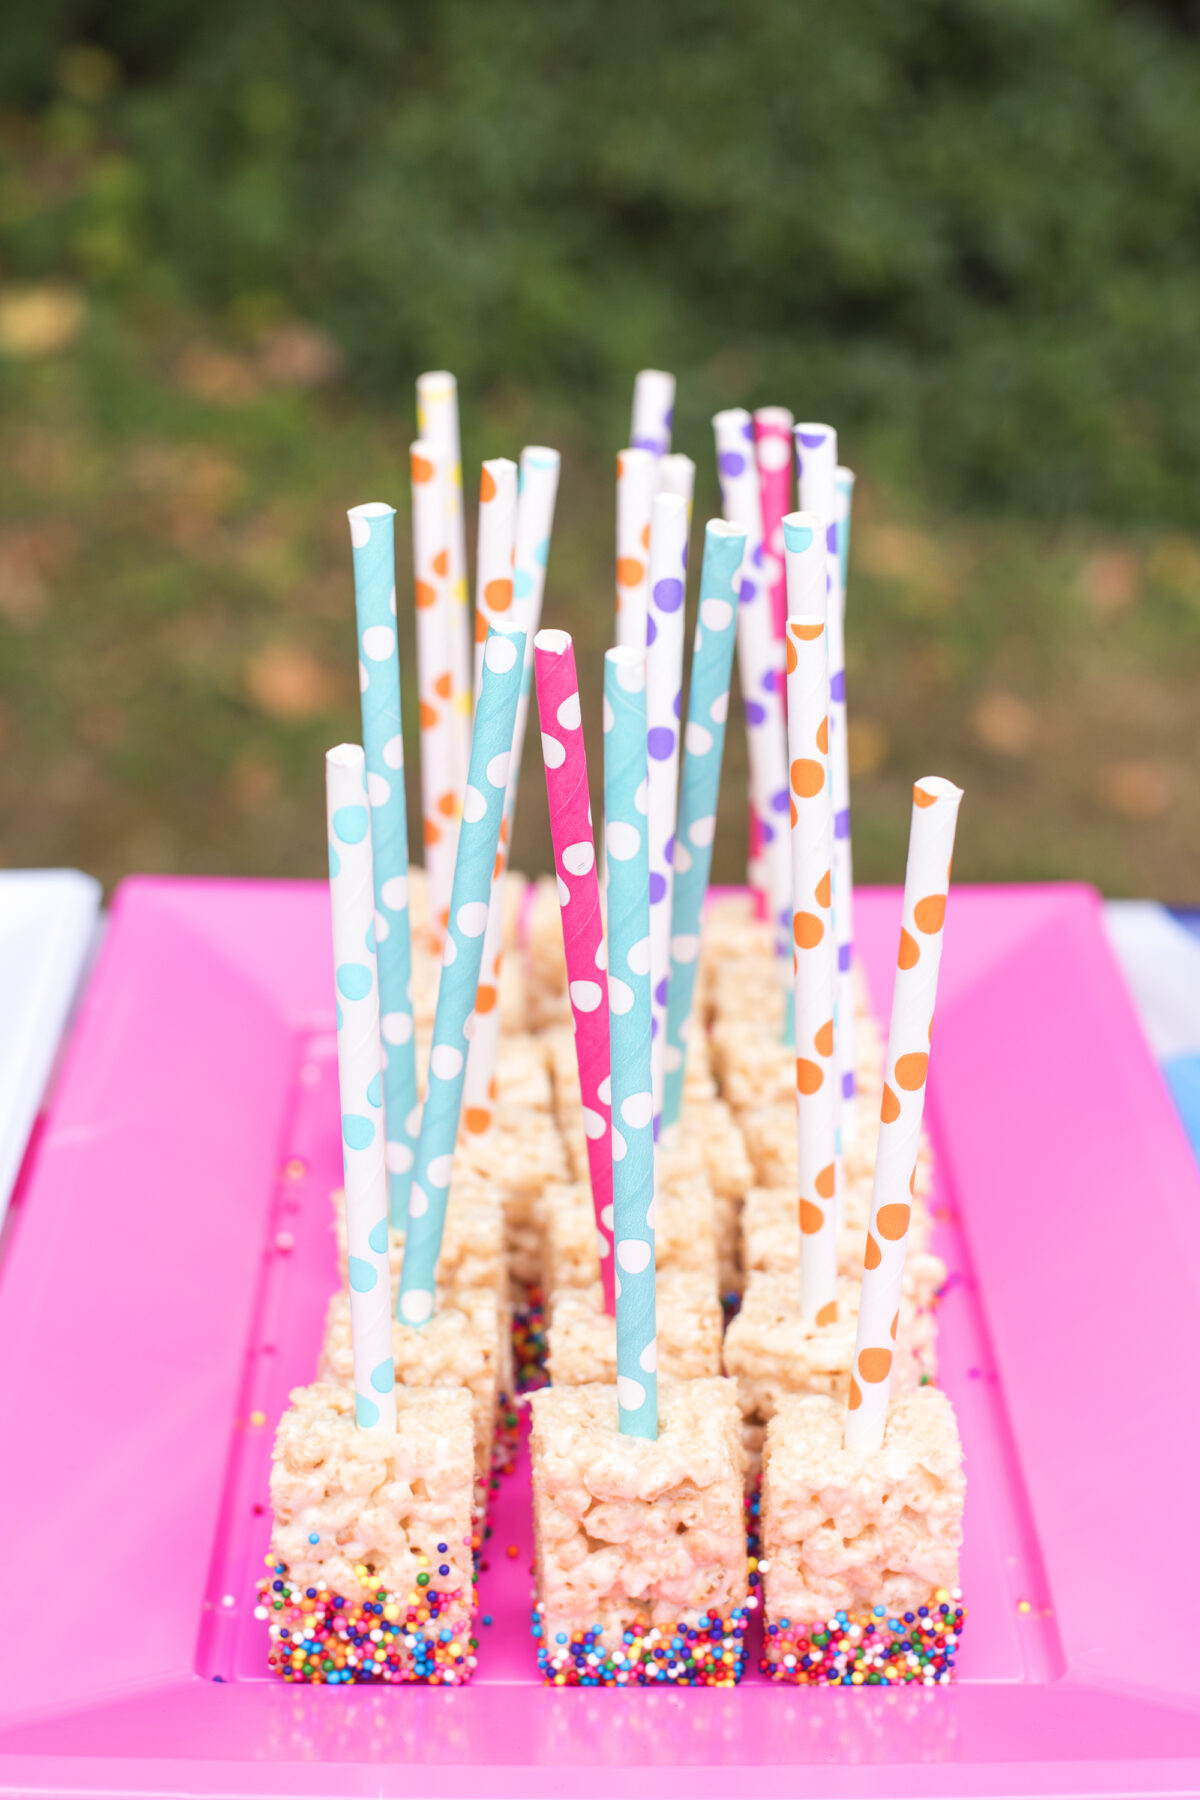 Image shows a bright pink plastic party platter filled with Rice Krispie treat lollipops dipped in rainbow sprinkles. The lollipops have coloured paper straw handles.